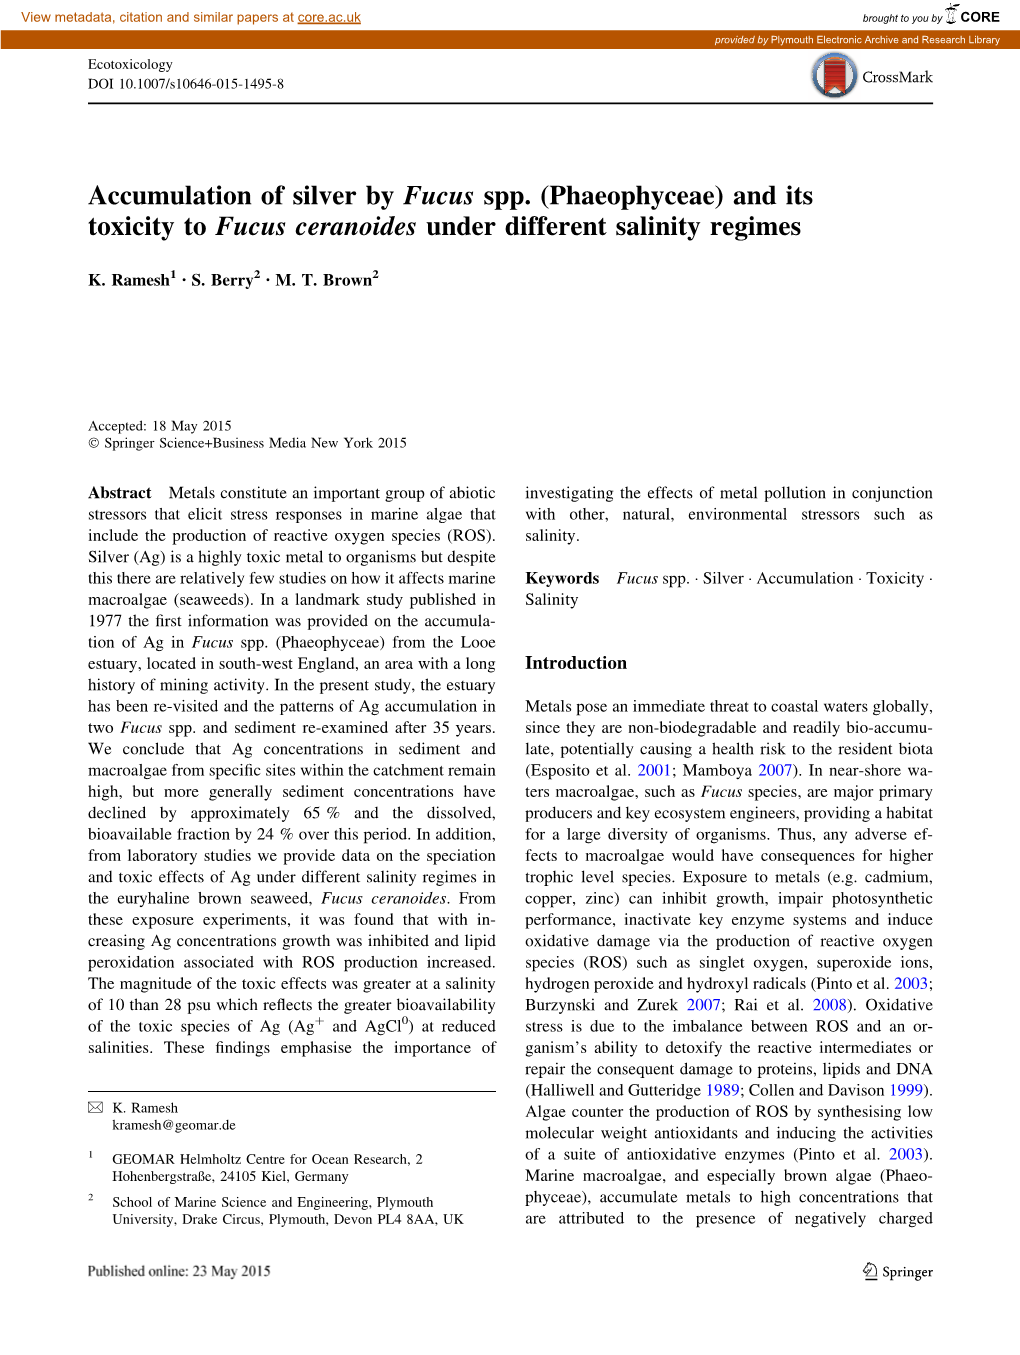 Phaeophyceae) and Its Toxicity to Fucus Ceranoides Under Different Salinity Regimes